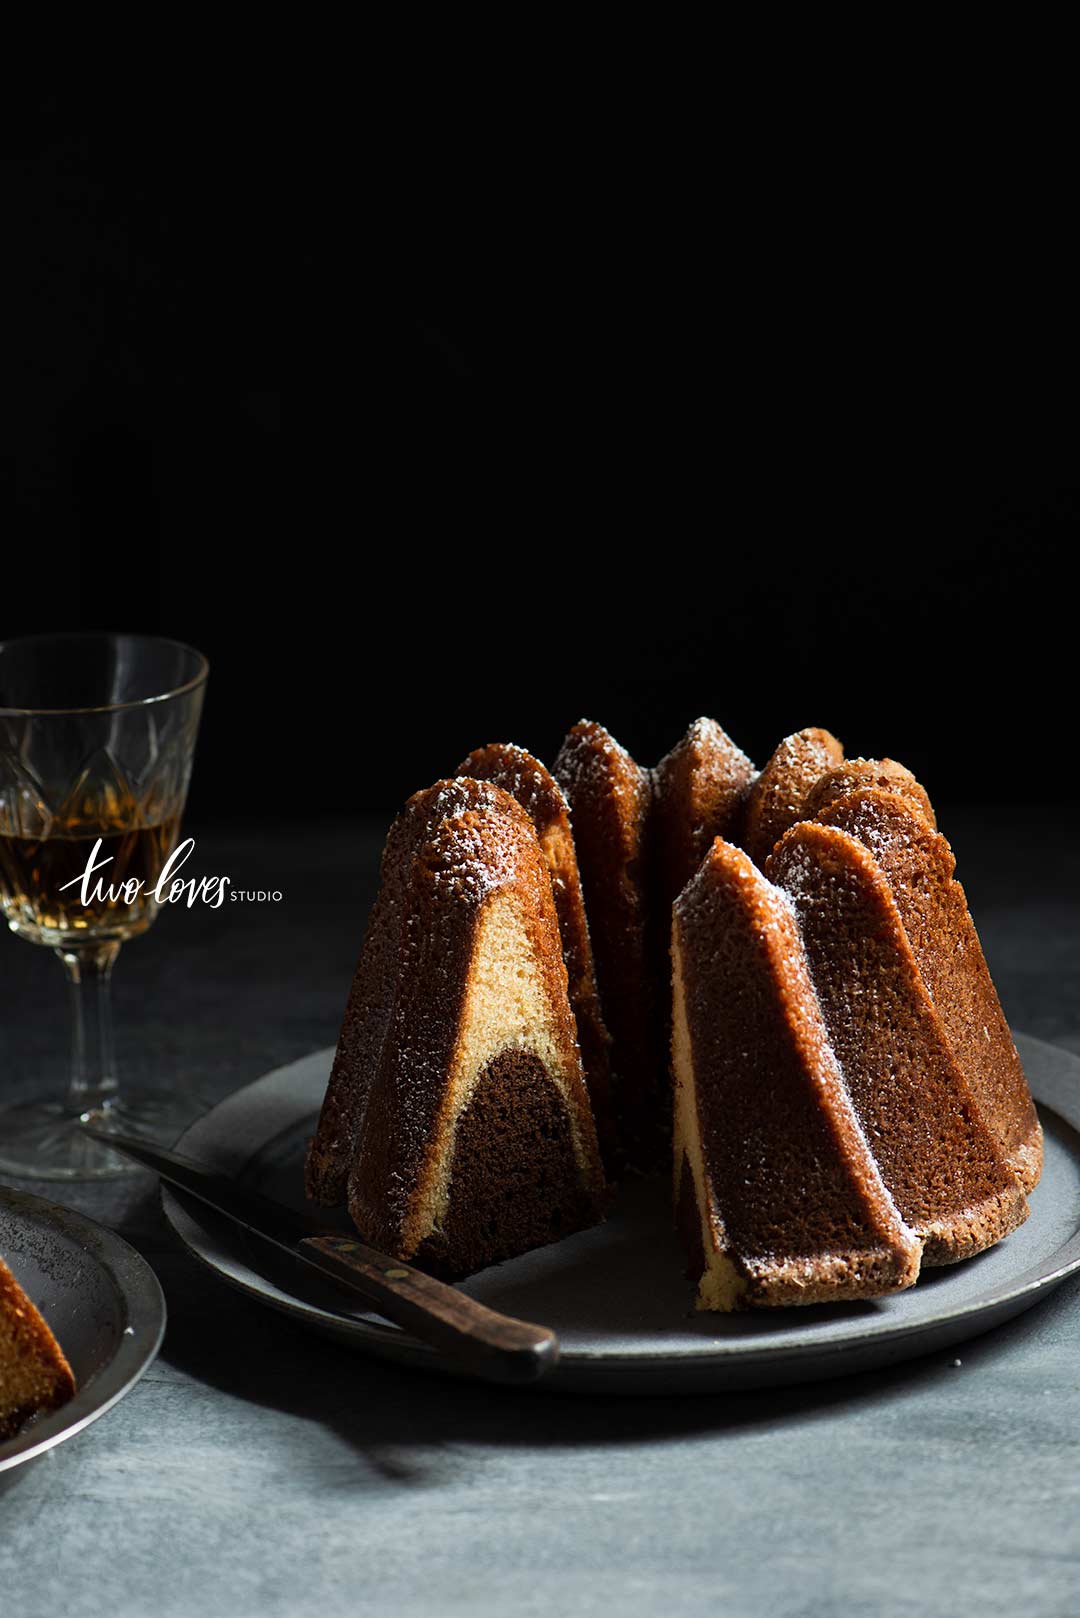 Low light food photography with bundt cake on plate and glass of brandy.